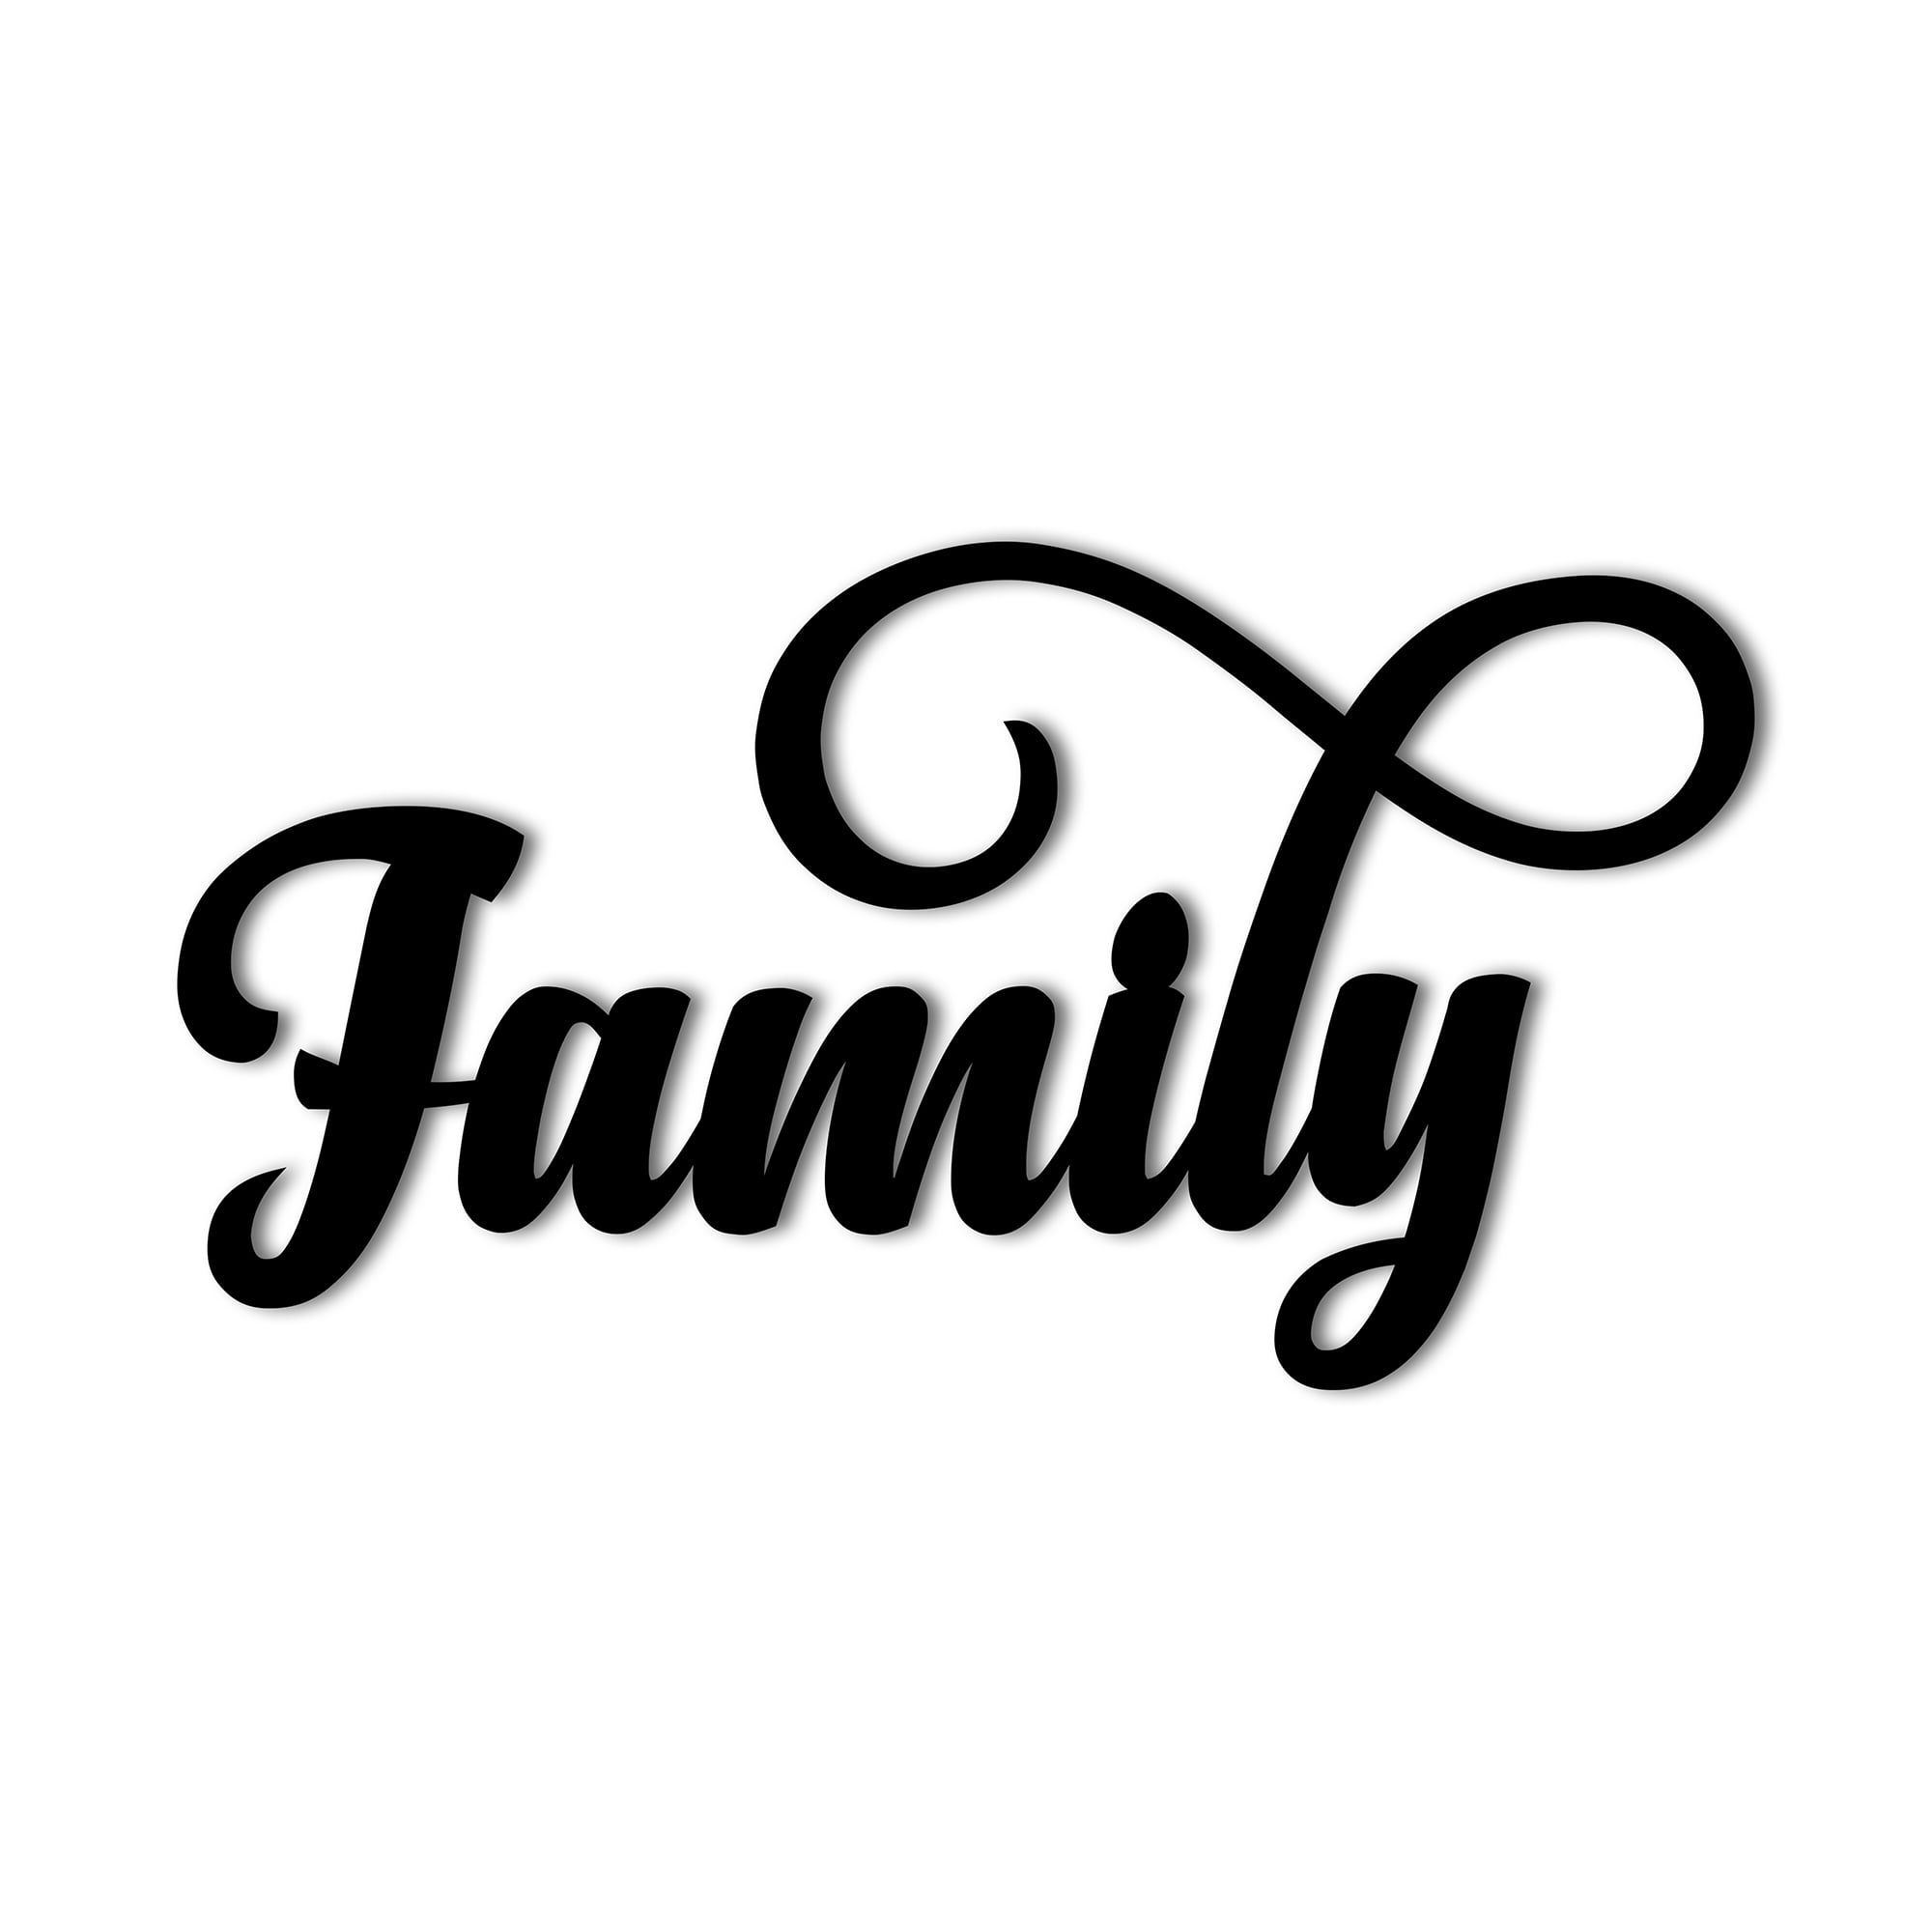 Family Metal Wall Sign Cursive Decorative Accent Decor Wall Decor Word Sign  – 3 Sizes / 13 Colors – Anniversary Gift Idea Husband Wife Room Decor  Indoor Outdoor Made In Usa – Walmart In Family Wall Sign Metal (View 14 of 15)